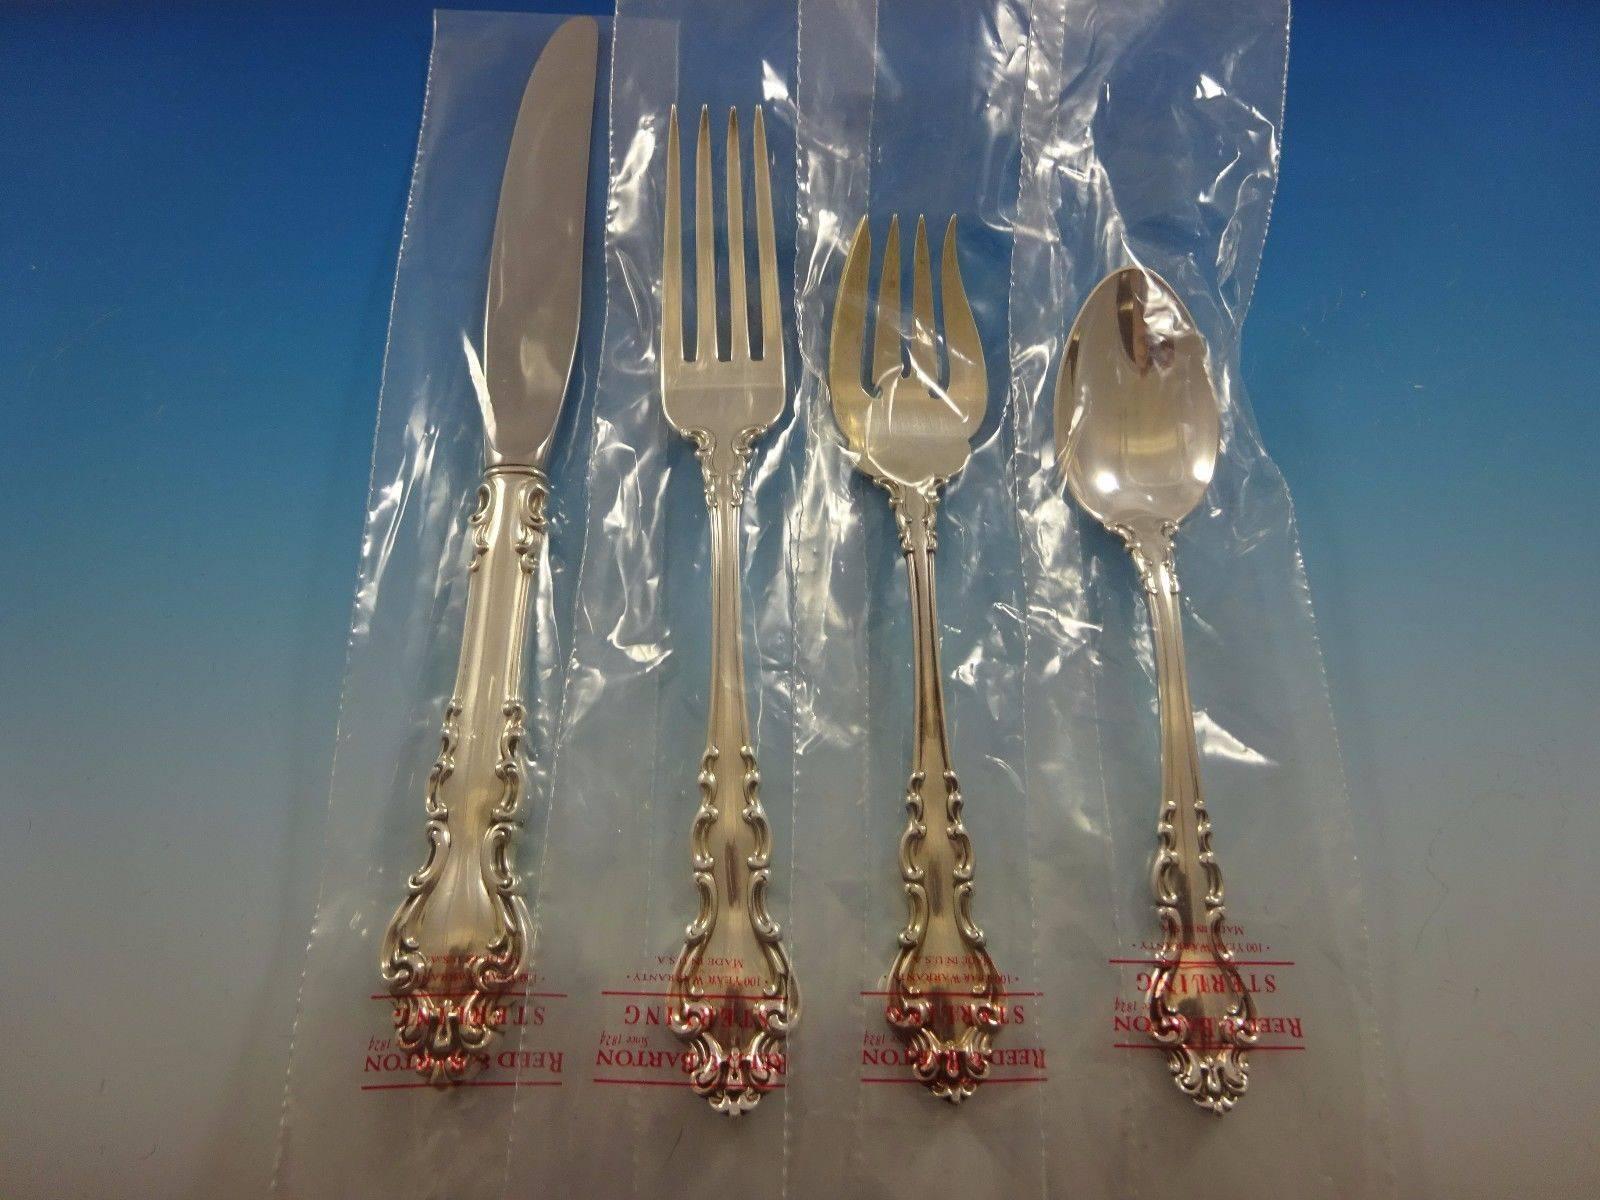 Spanish baroque by Reed & Barton sterling silver flatware set of 35 pieces. This set includes: Eight knives, 9 1/4